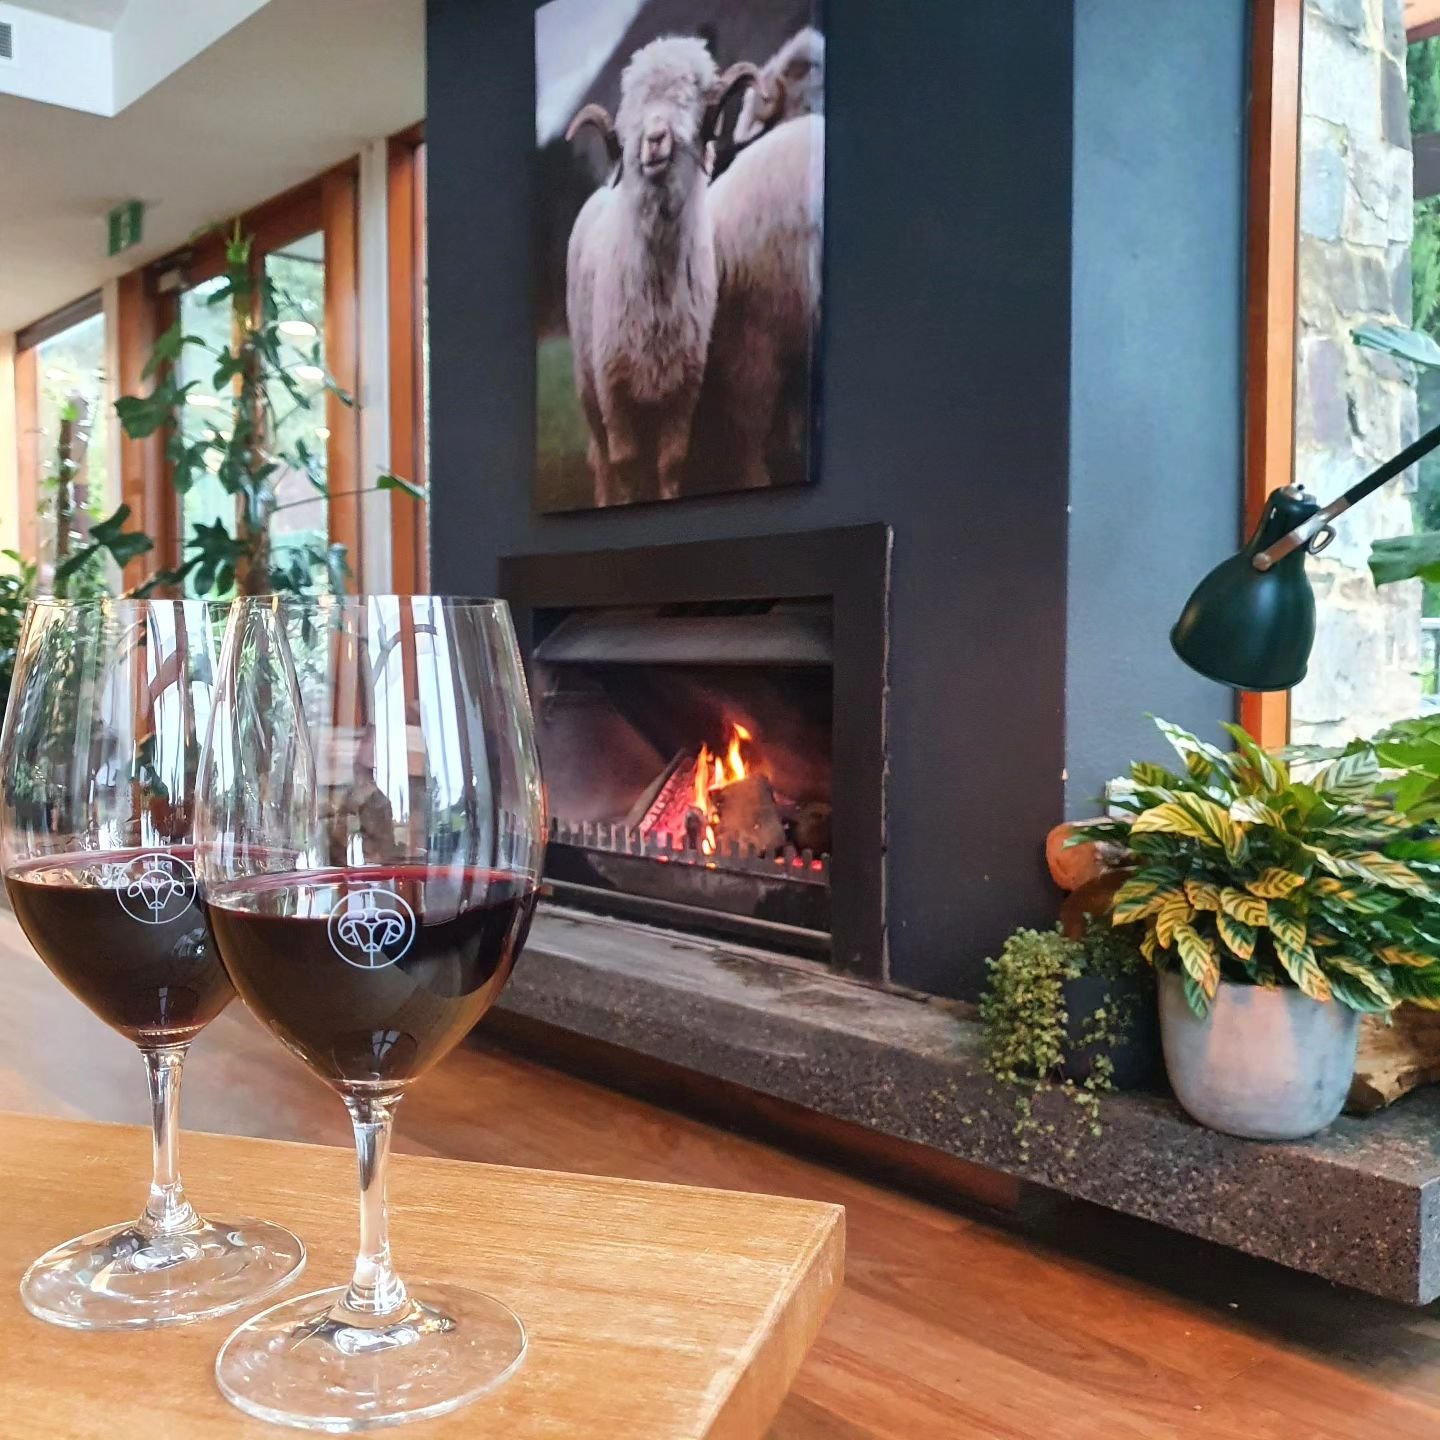 Saturday by the fire 🍷

#Saturday #dine #dining #red #openfire #gippsland #warragul #gippslandwine #settlein